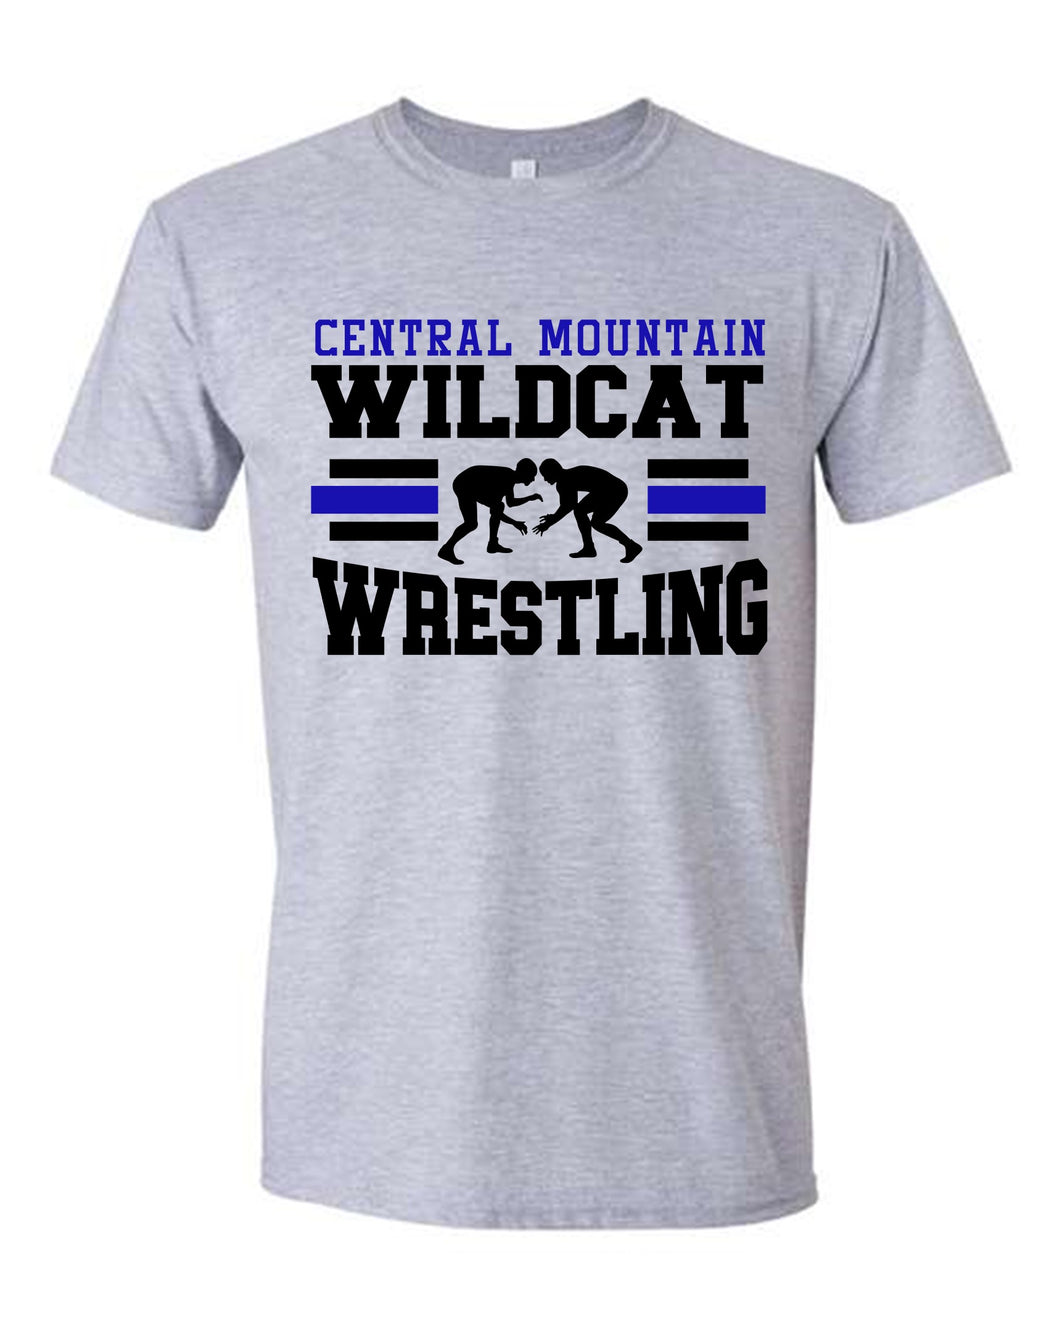 Central Mountain Wildcats Wrestling Style 2 - Click for Additional Styles (Youth and Adult)